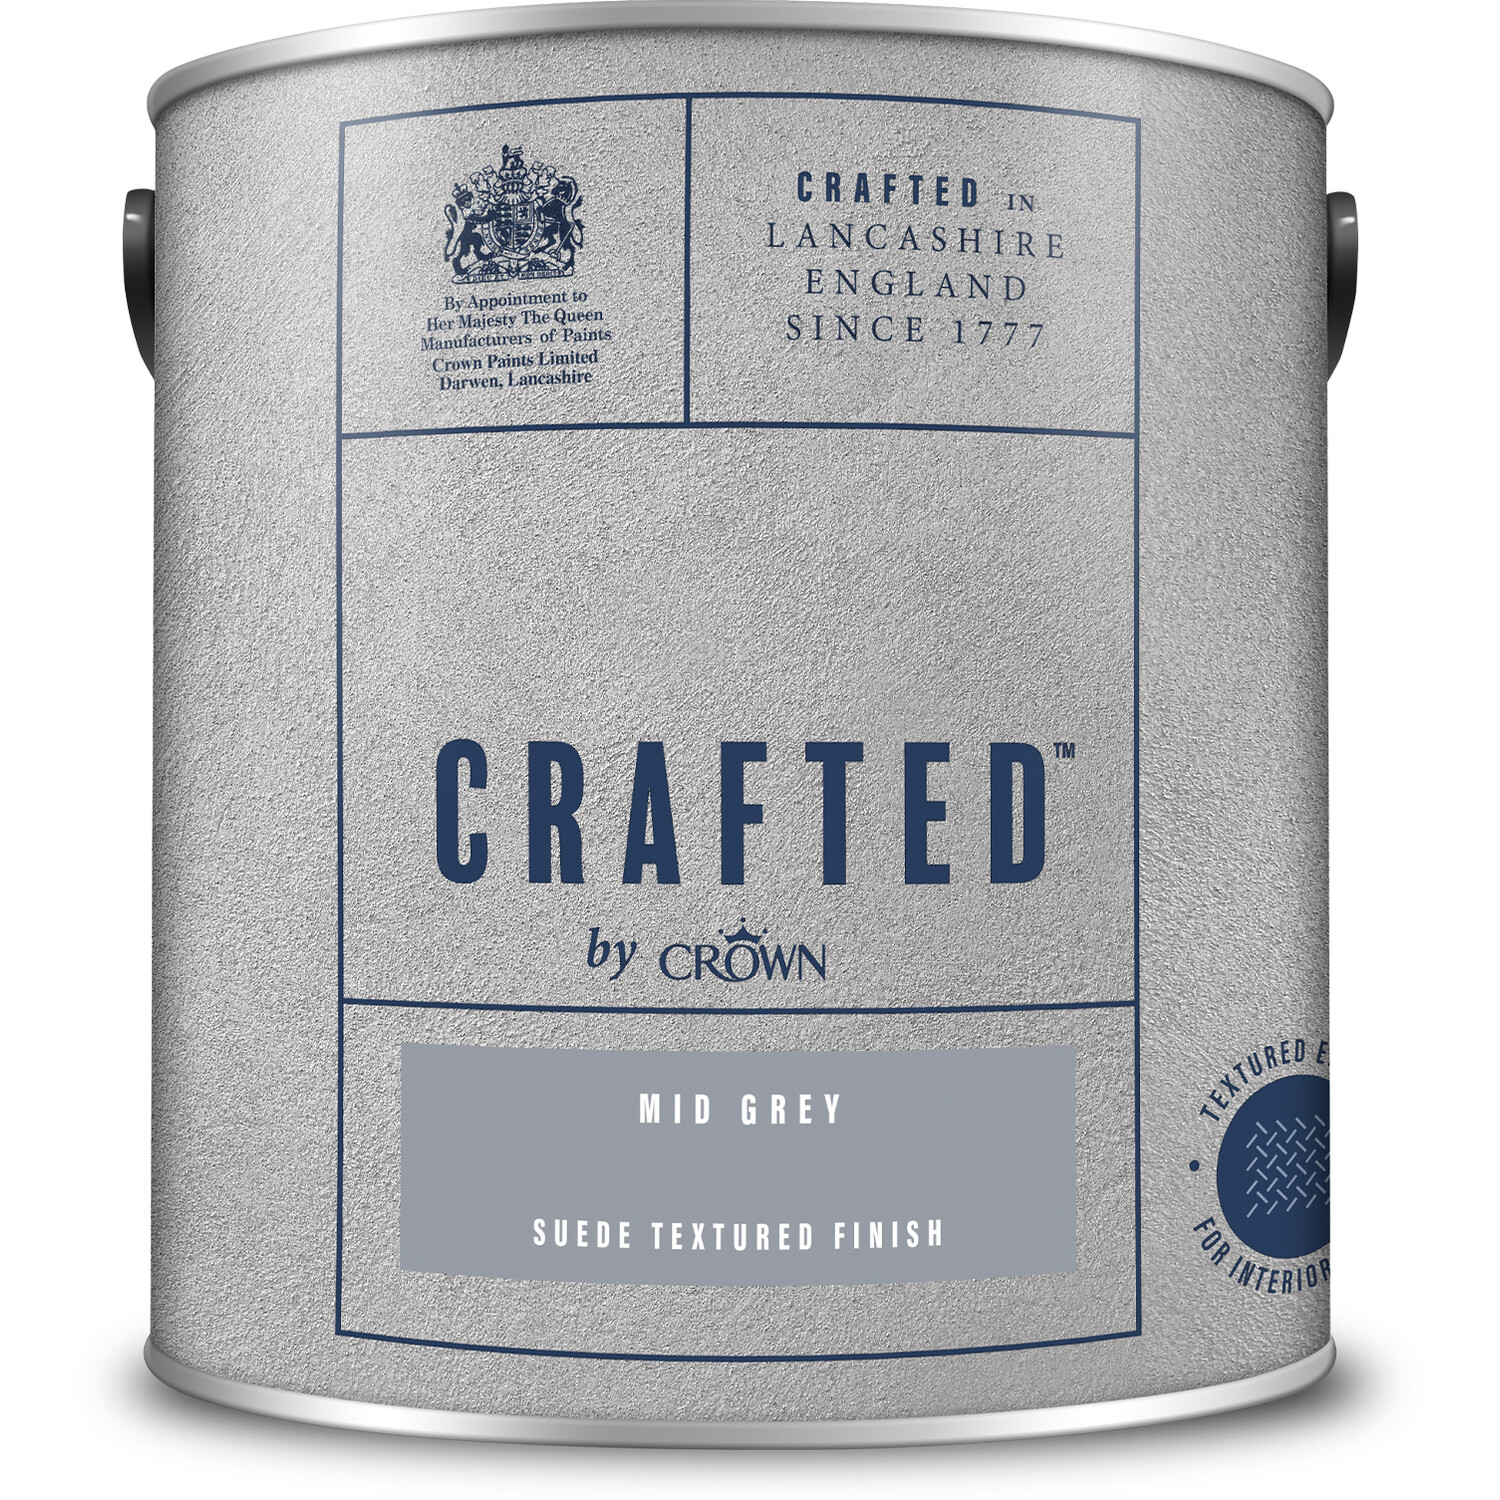 Crown Crafted Walls Mid Grey Suede Textured Finish Paint 2.5L Image 2